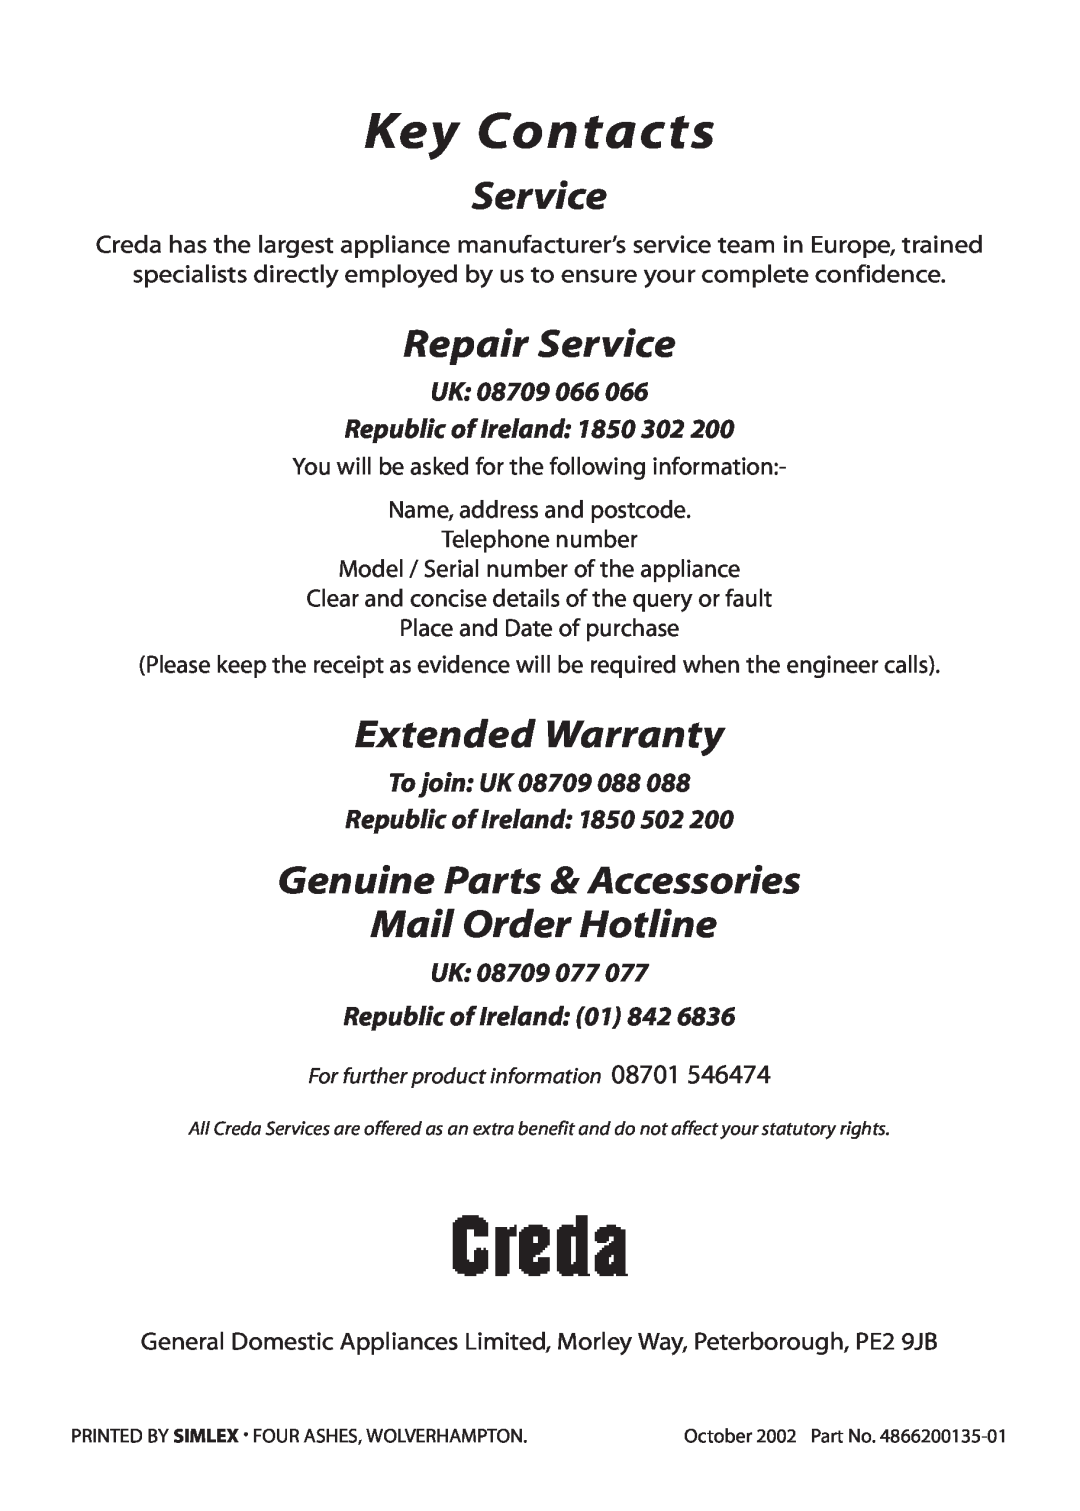 Creda REFLECTION manual Key Contacts, Repair Service, Extended Warranty, Genuine Parts & Accessories Mail Order Hotline 